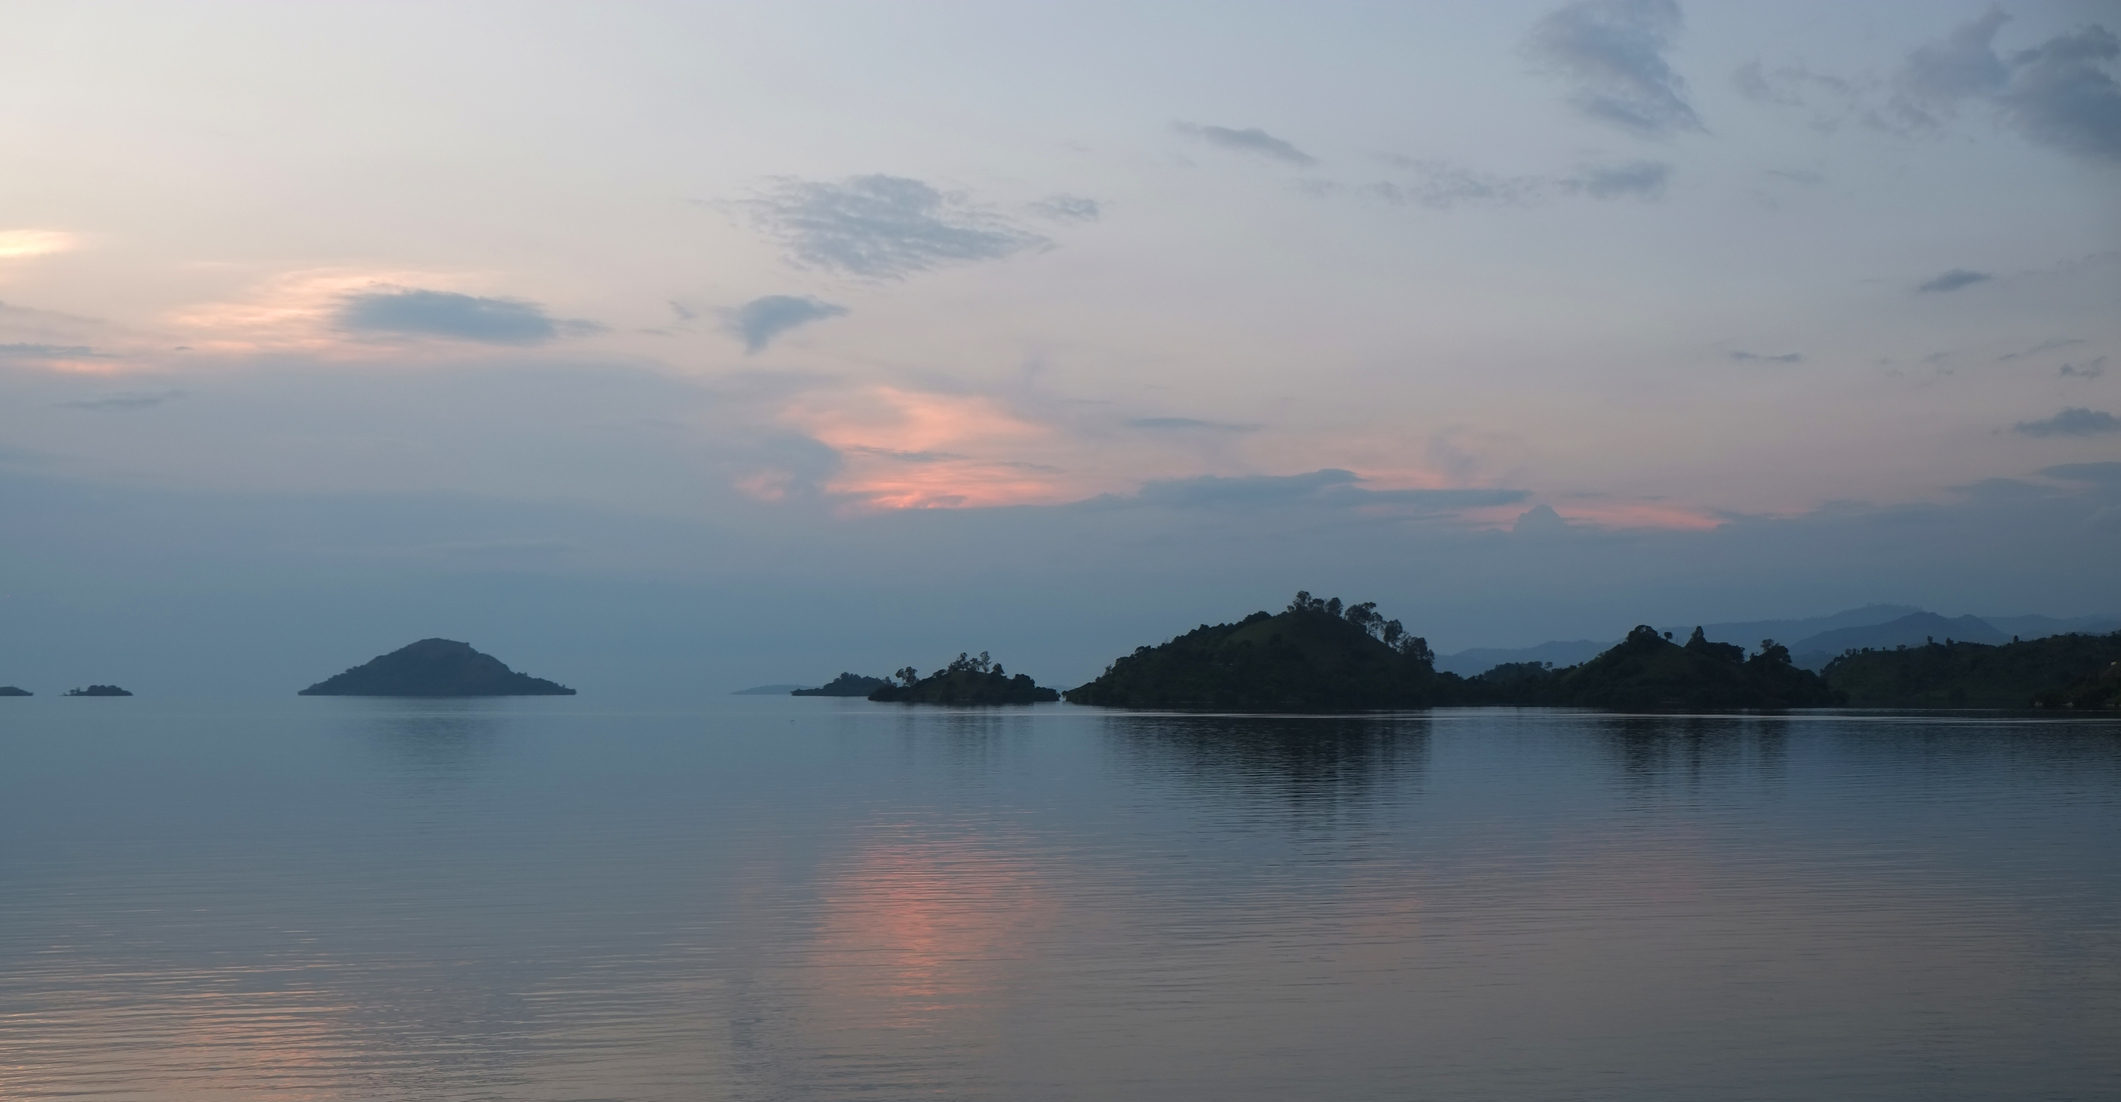 Witness extraordinary landscape in Kibuye, Rwanda like this sunset over Lake Kivu when you take a tailor-made holiday with Alfred&